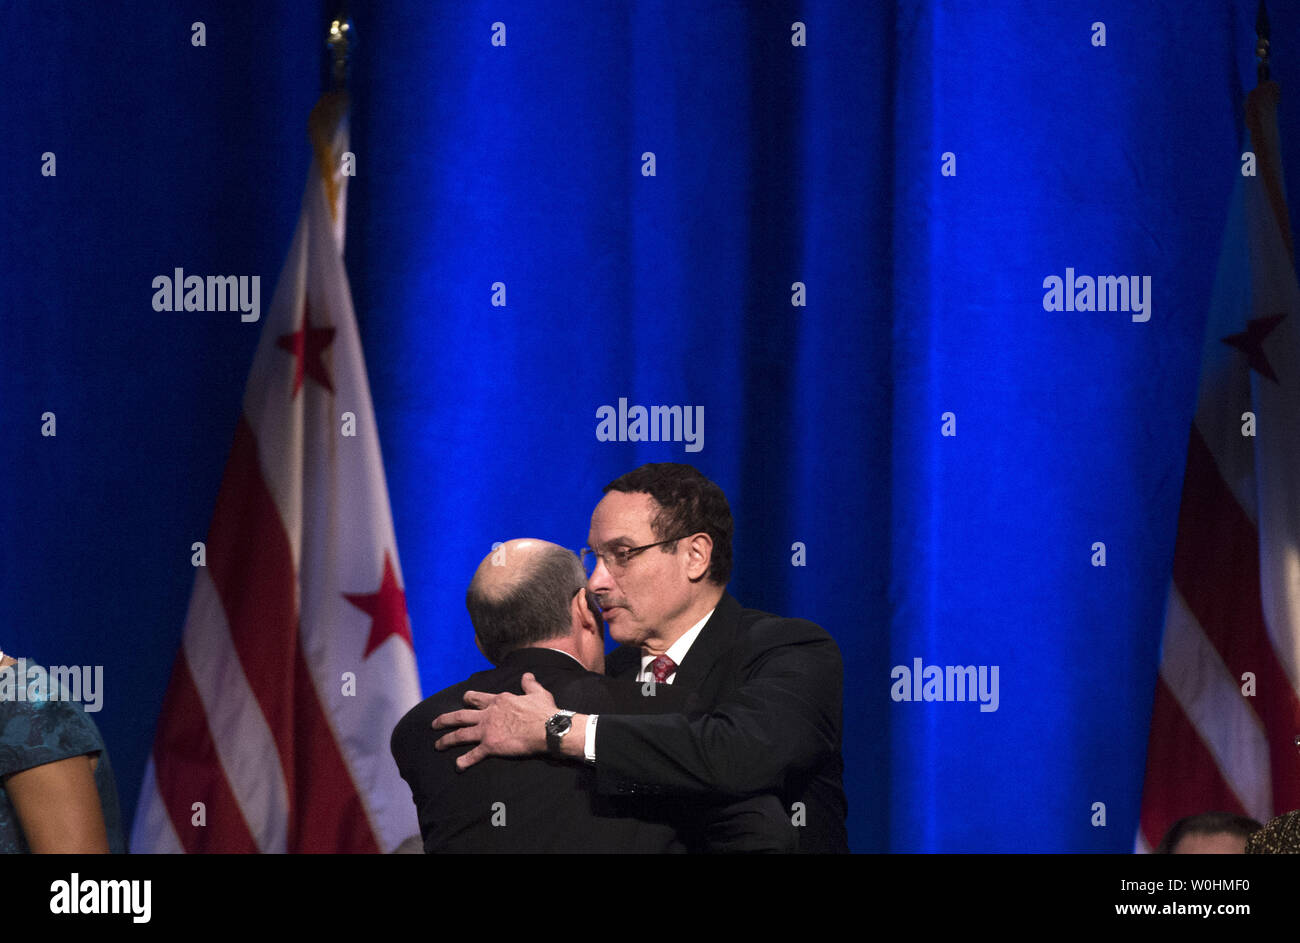 Outgoing Washington, D.C. Mayor Vincent Gray hugs D.C. Council Chair Phil Mendelson during the Inauguration for newly elected mayor Murial Bowser in Washington, D.C. on January 2, 2015. The three-term councilwoman defeated incumbent Vincent Grey to become the District's 7th Mayor. Kevin Dietsch/UPI Stock Photo